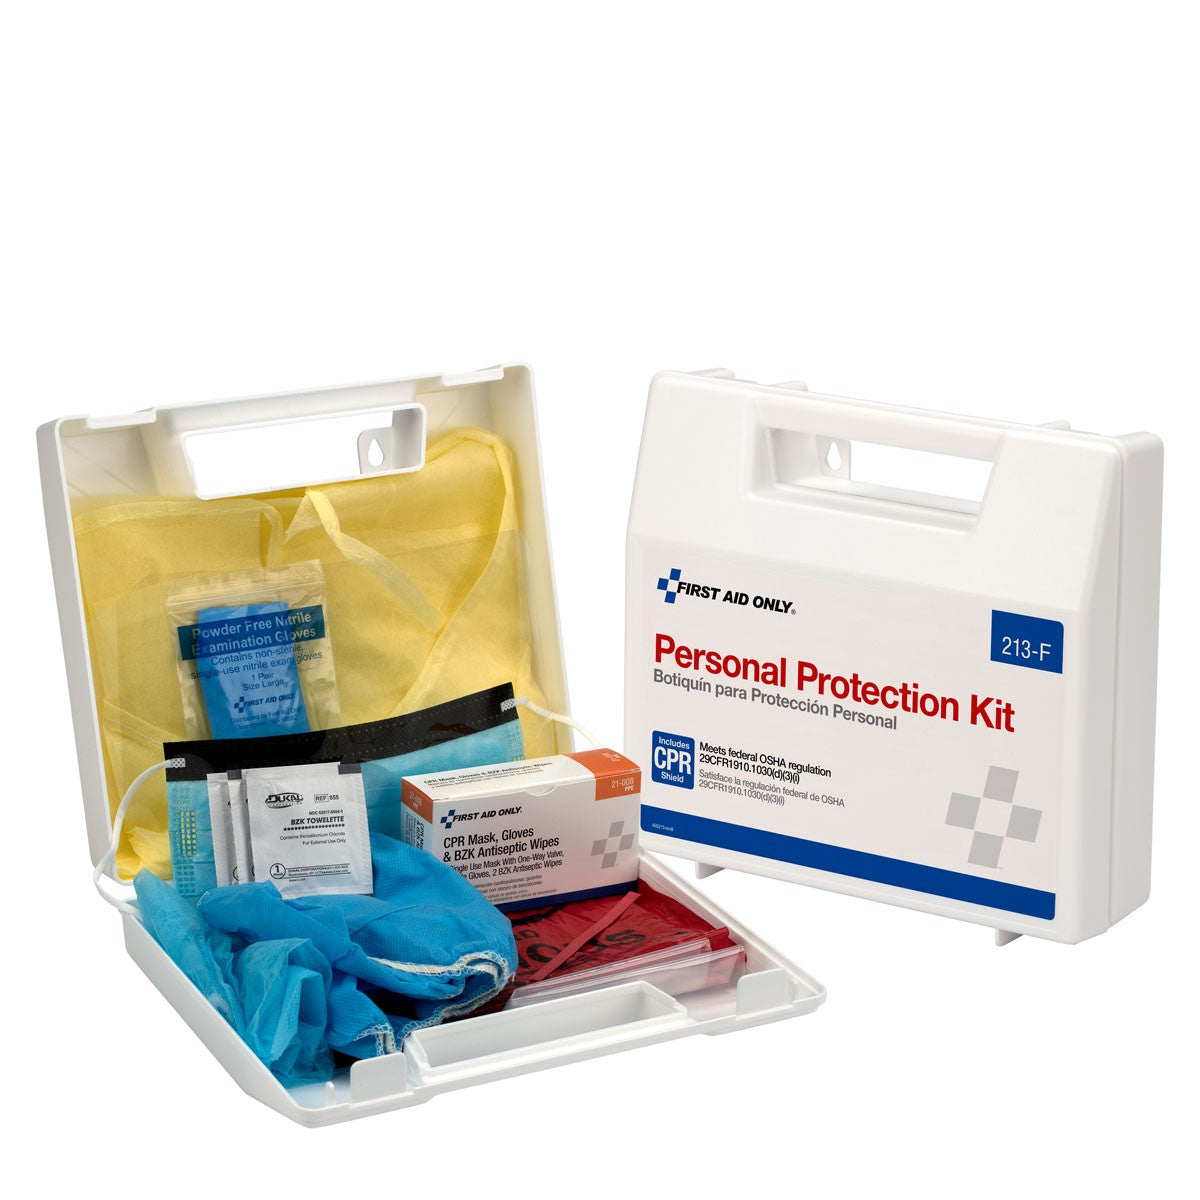 Personal Protection Kit, BBP (Blood Borne Pathogen) Spill Clean Up Apparel Kit With CPR Pack, Plastic Case - BS-FAK-213-F-1-FM